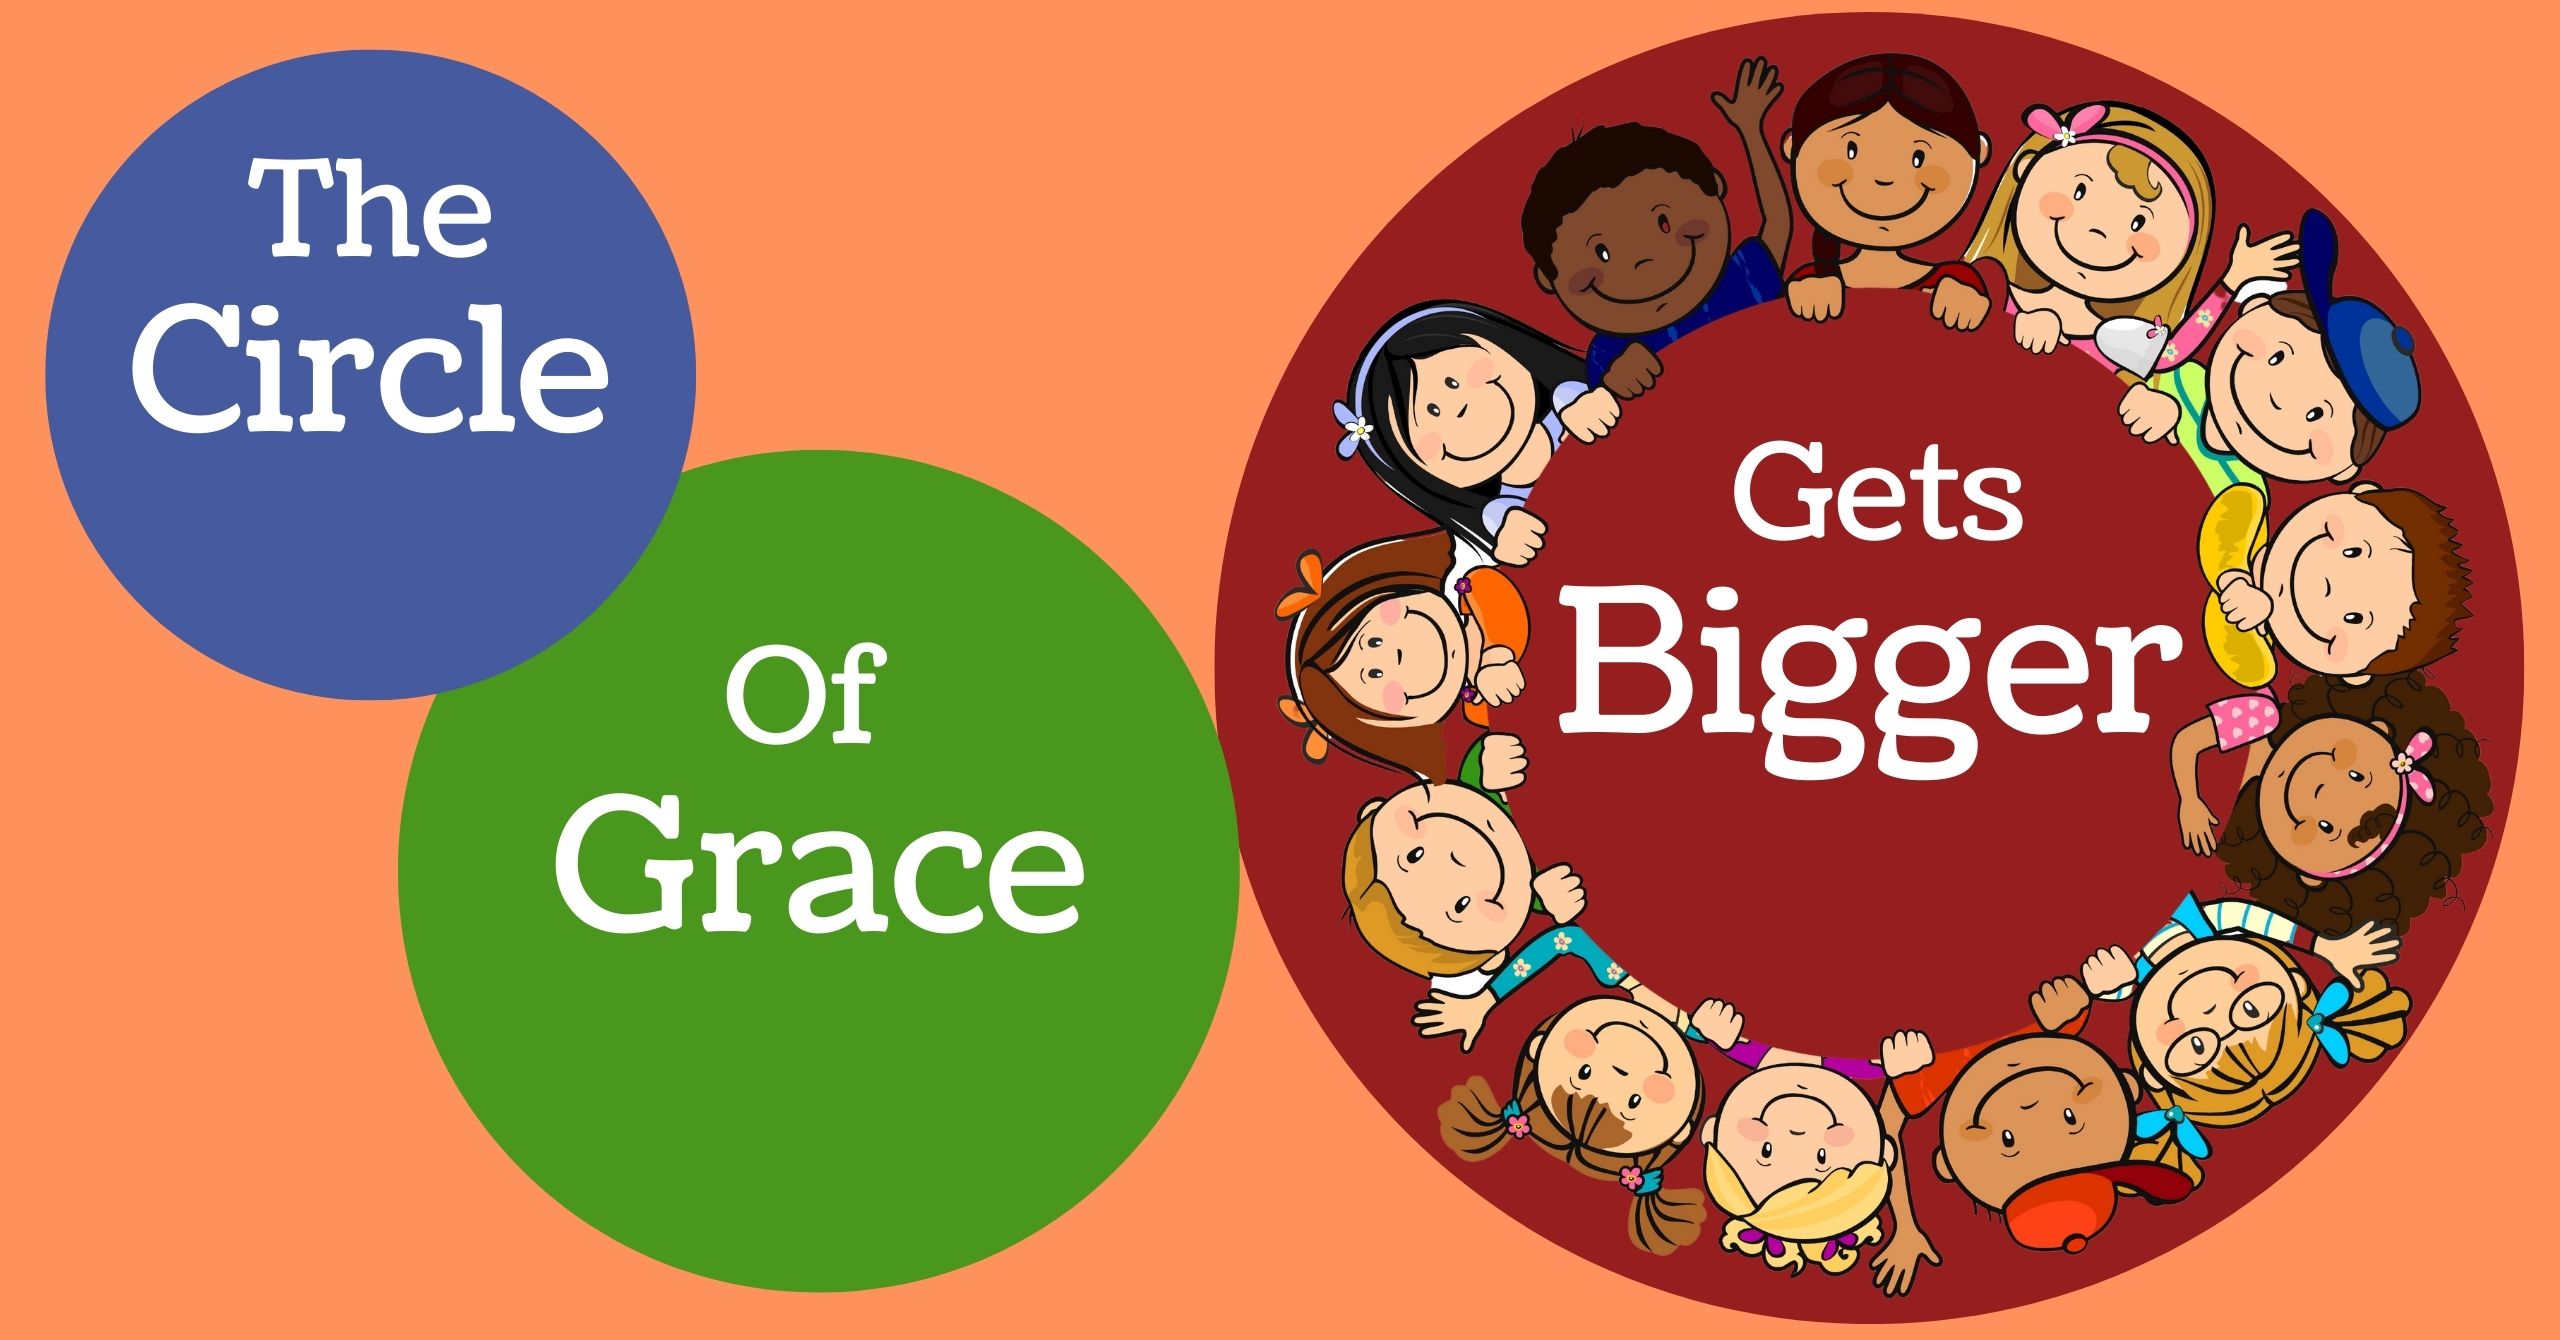 Featured image for “The Circle of Grace Gets Bigger”